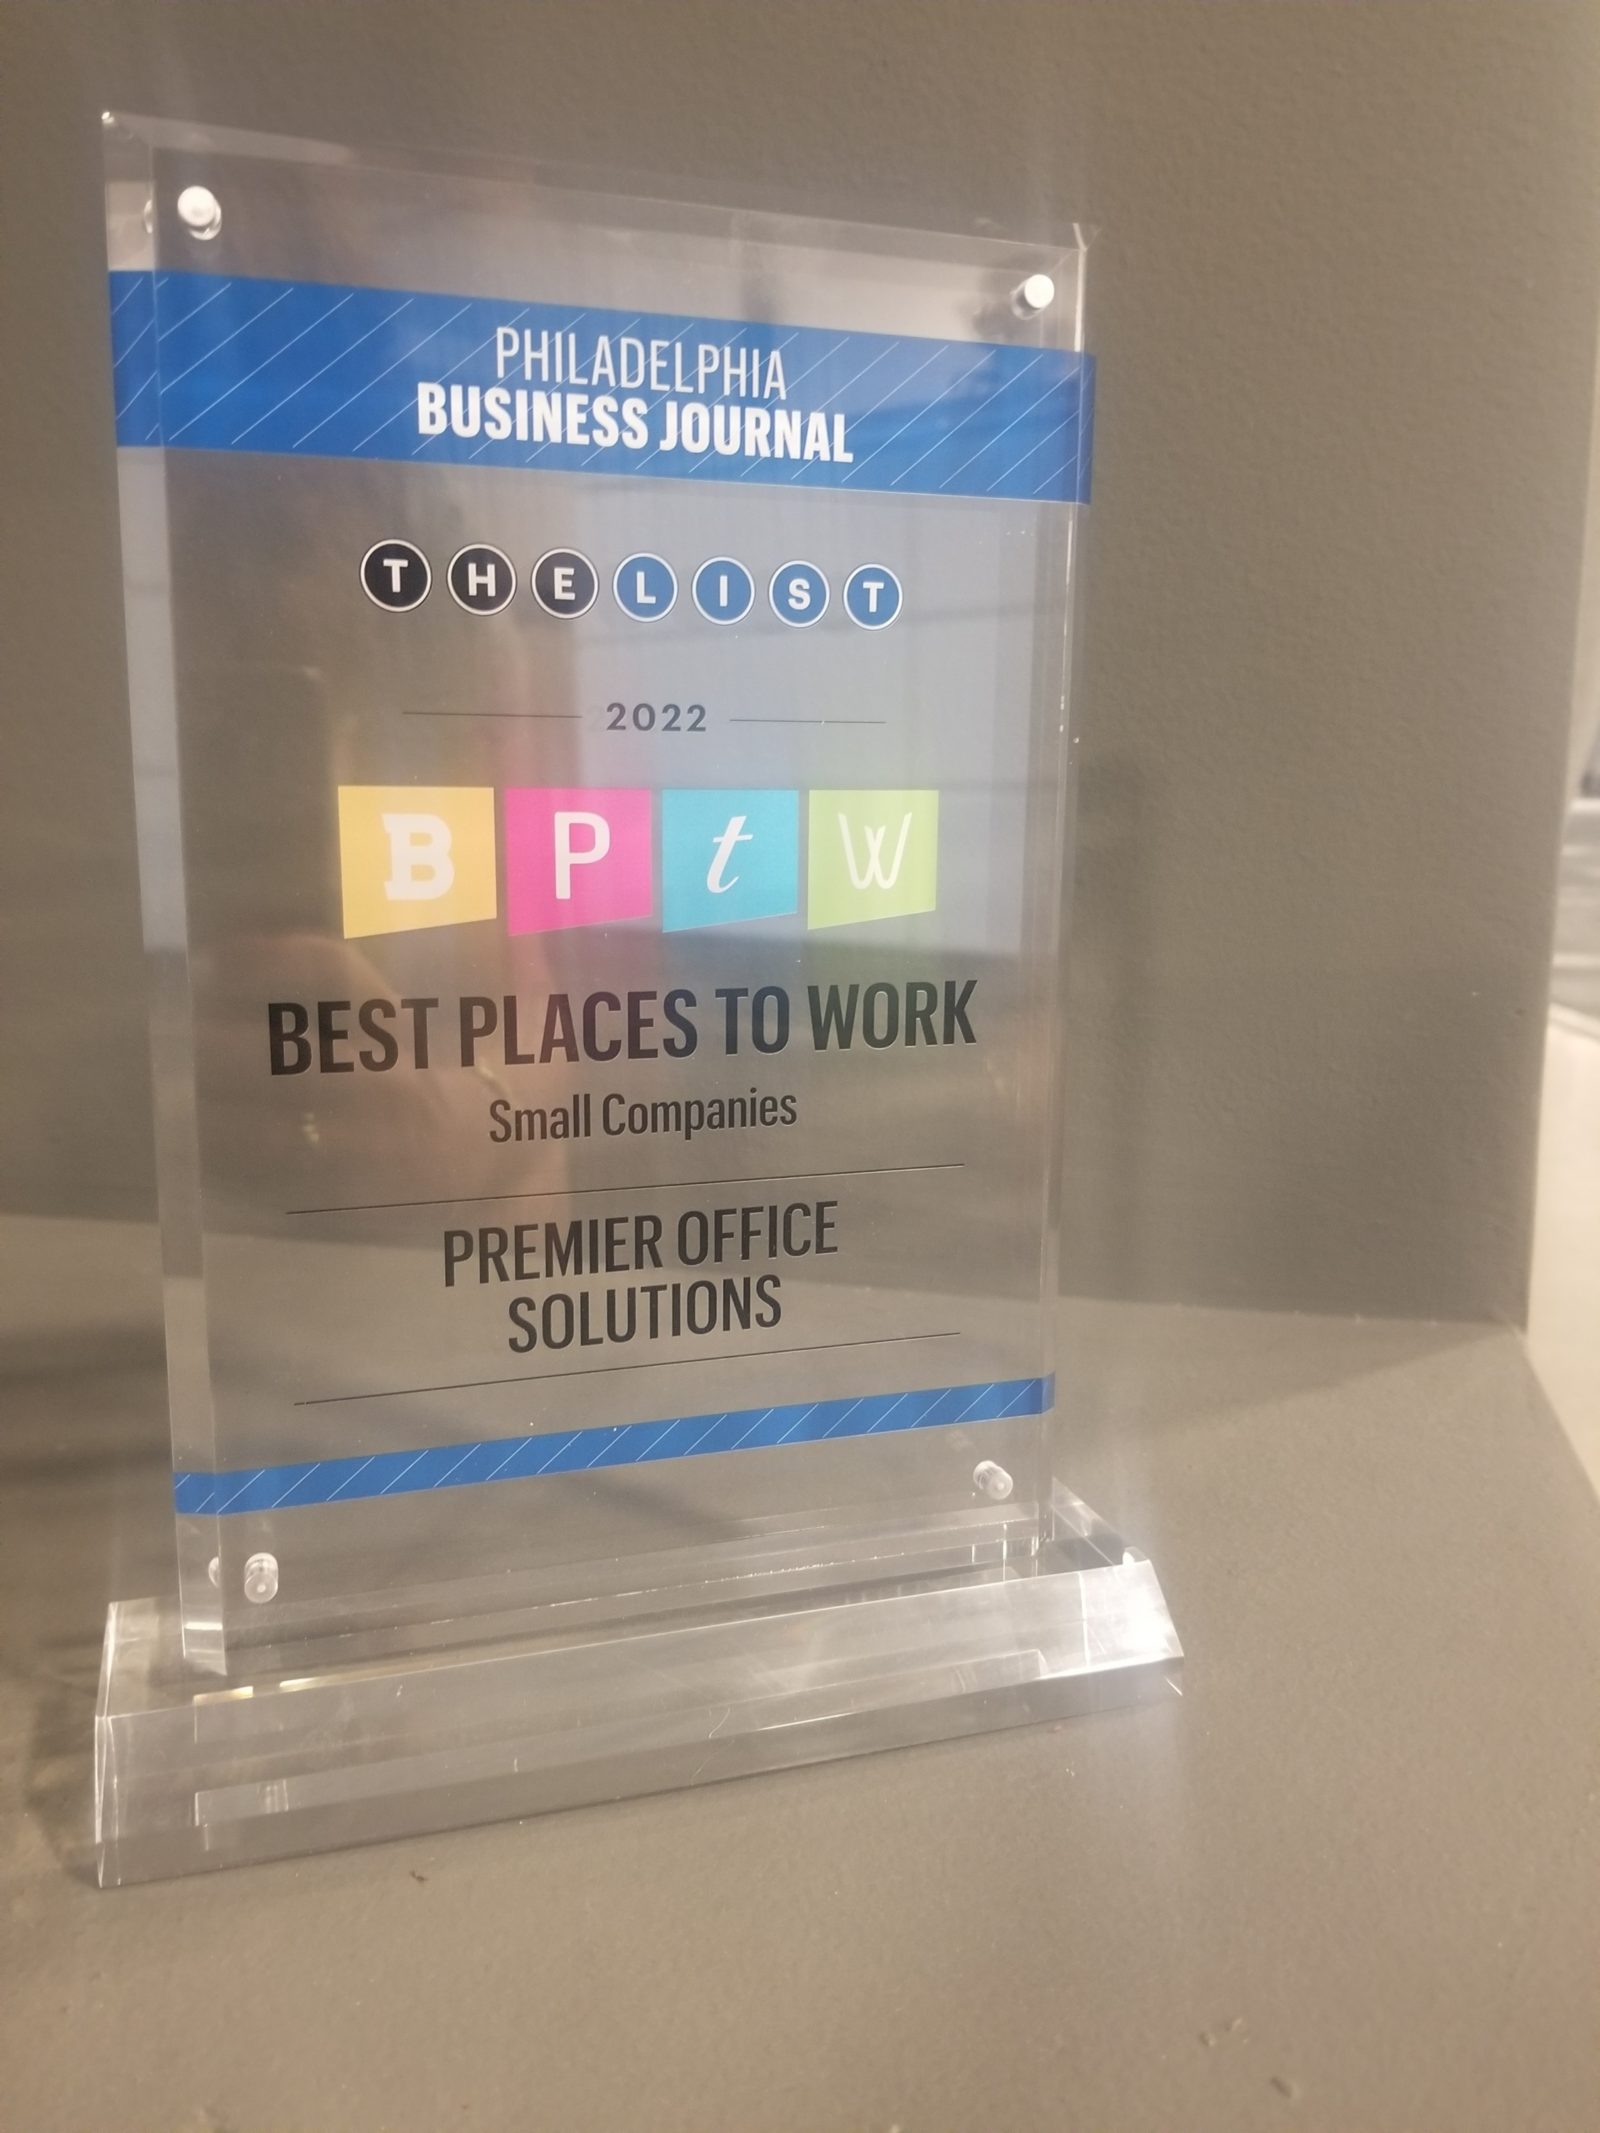 Acrylic desktop award with the Best Places to Work logo and Premier Office Solutions listed as a winner.